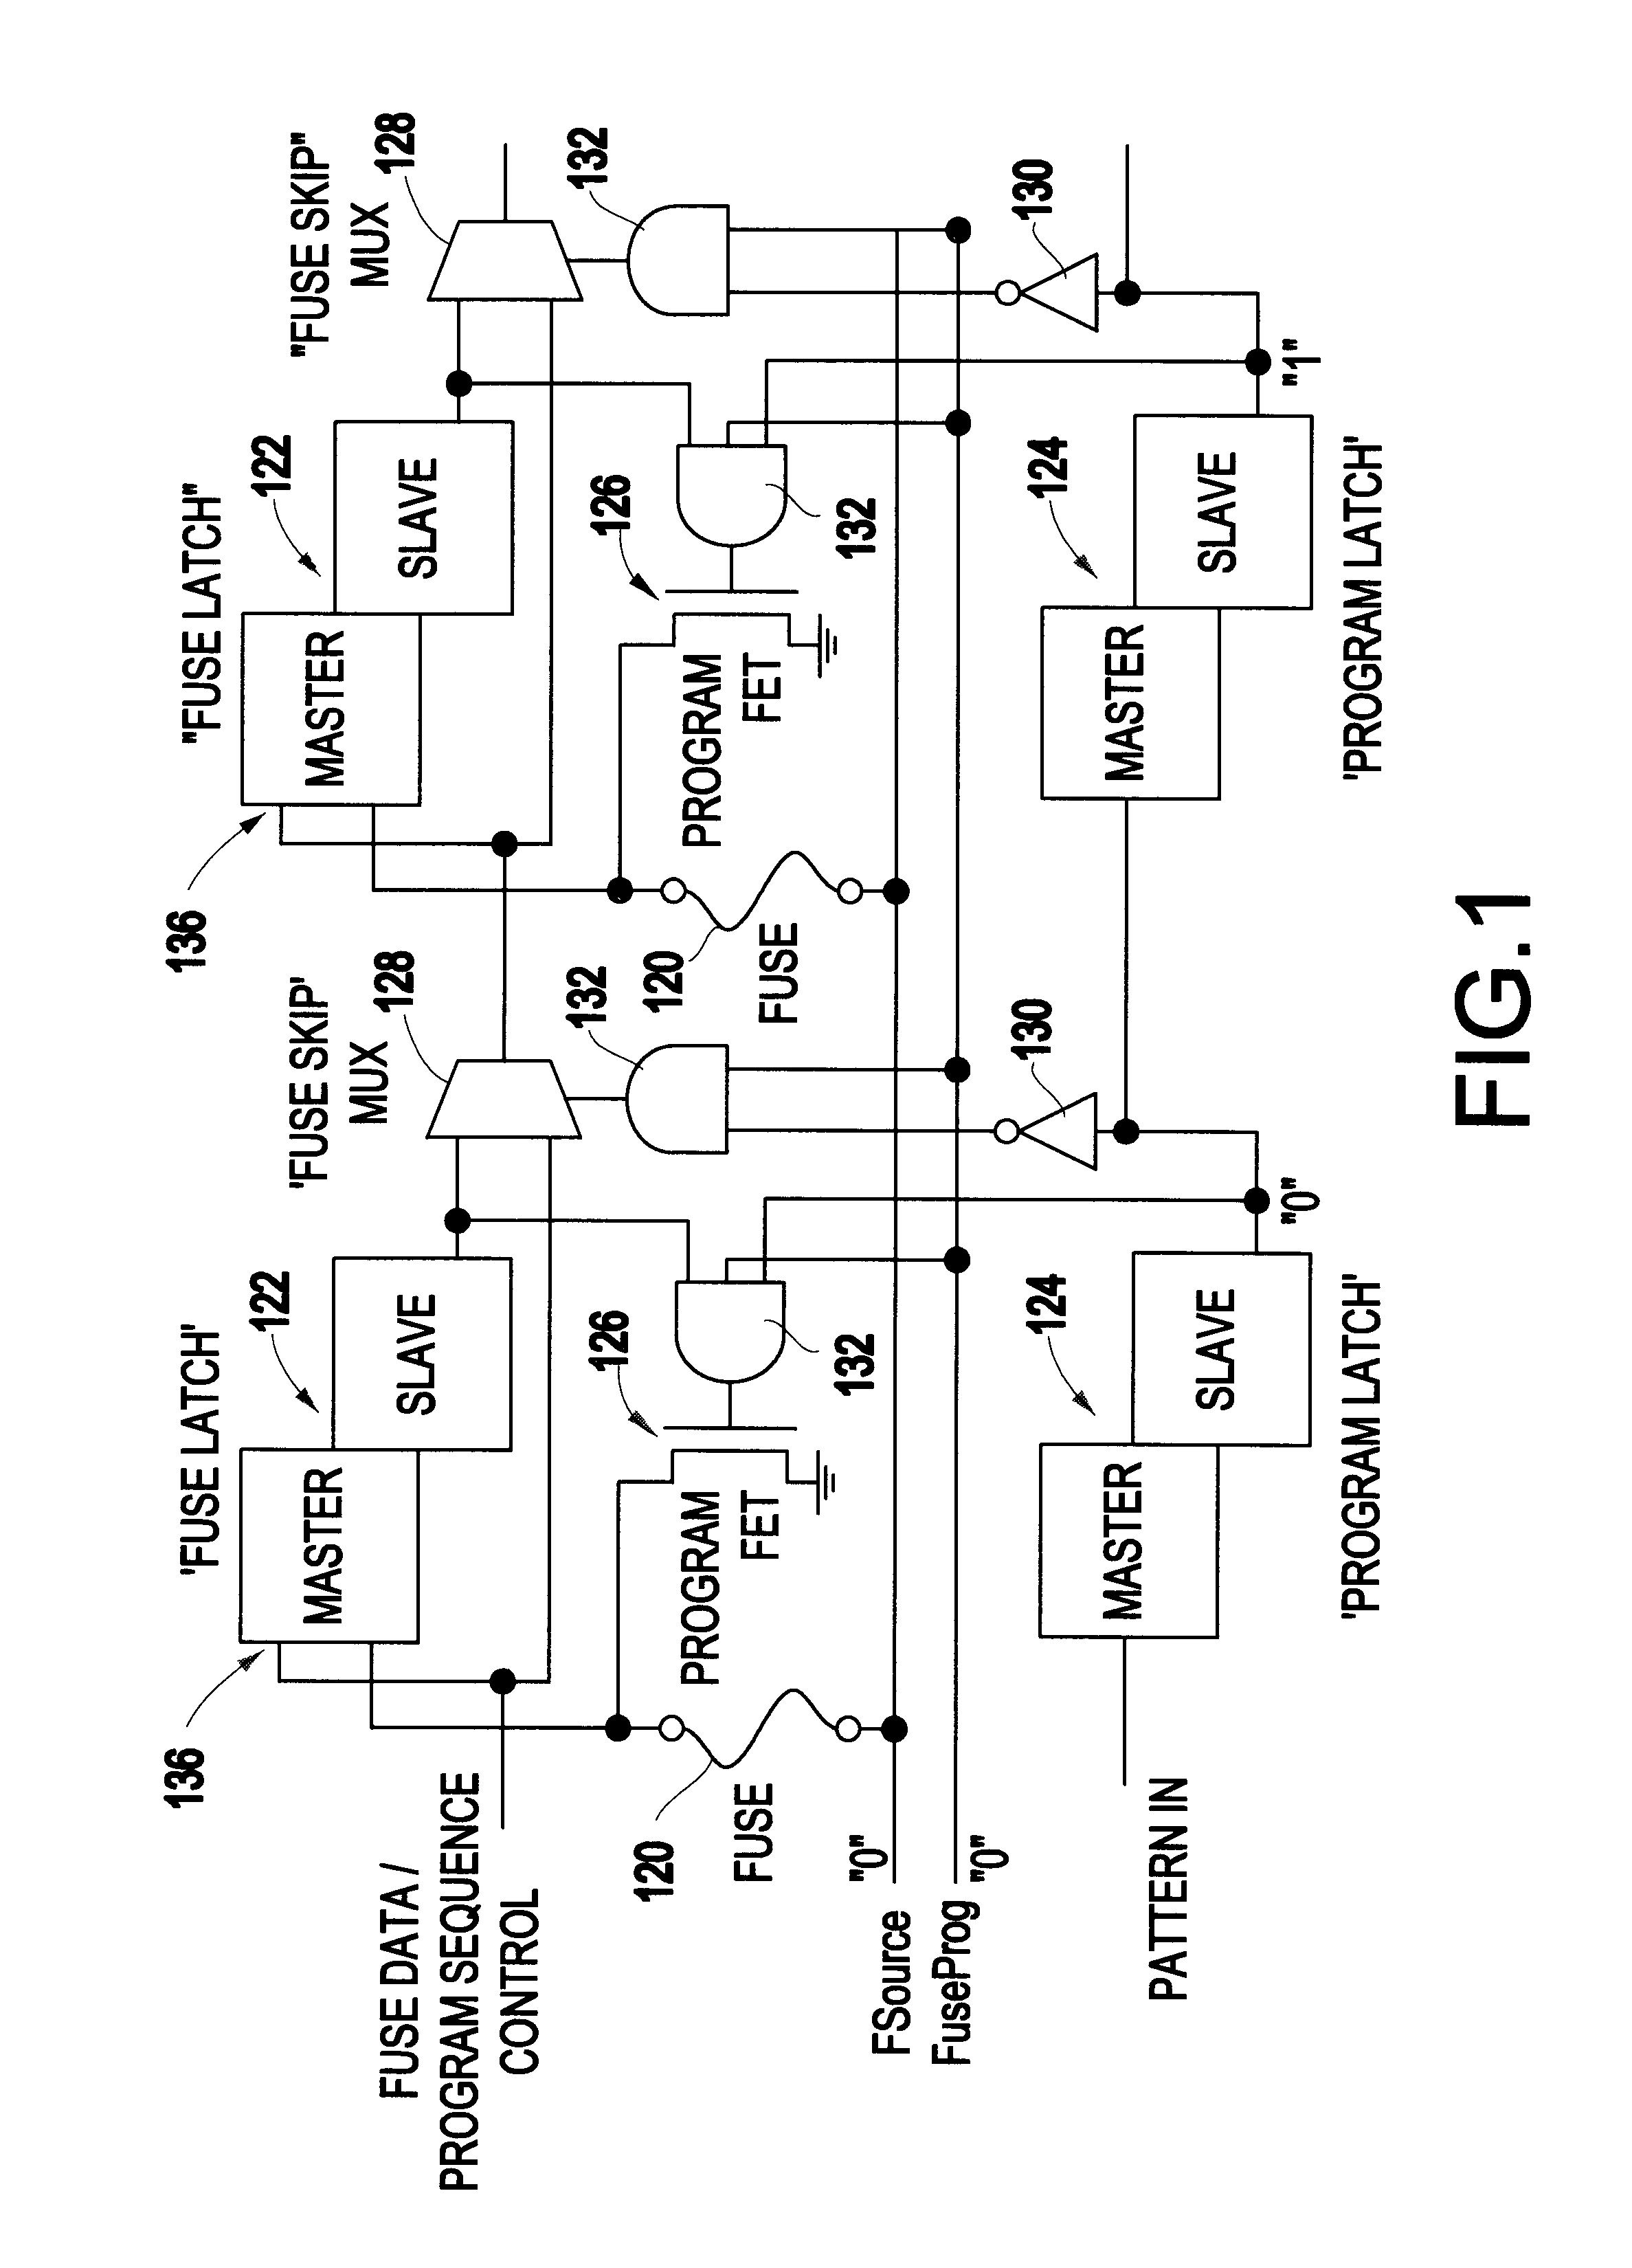 Method of electrically blowing fuses under control of an on-chip tester interface apparatus